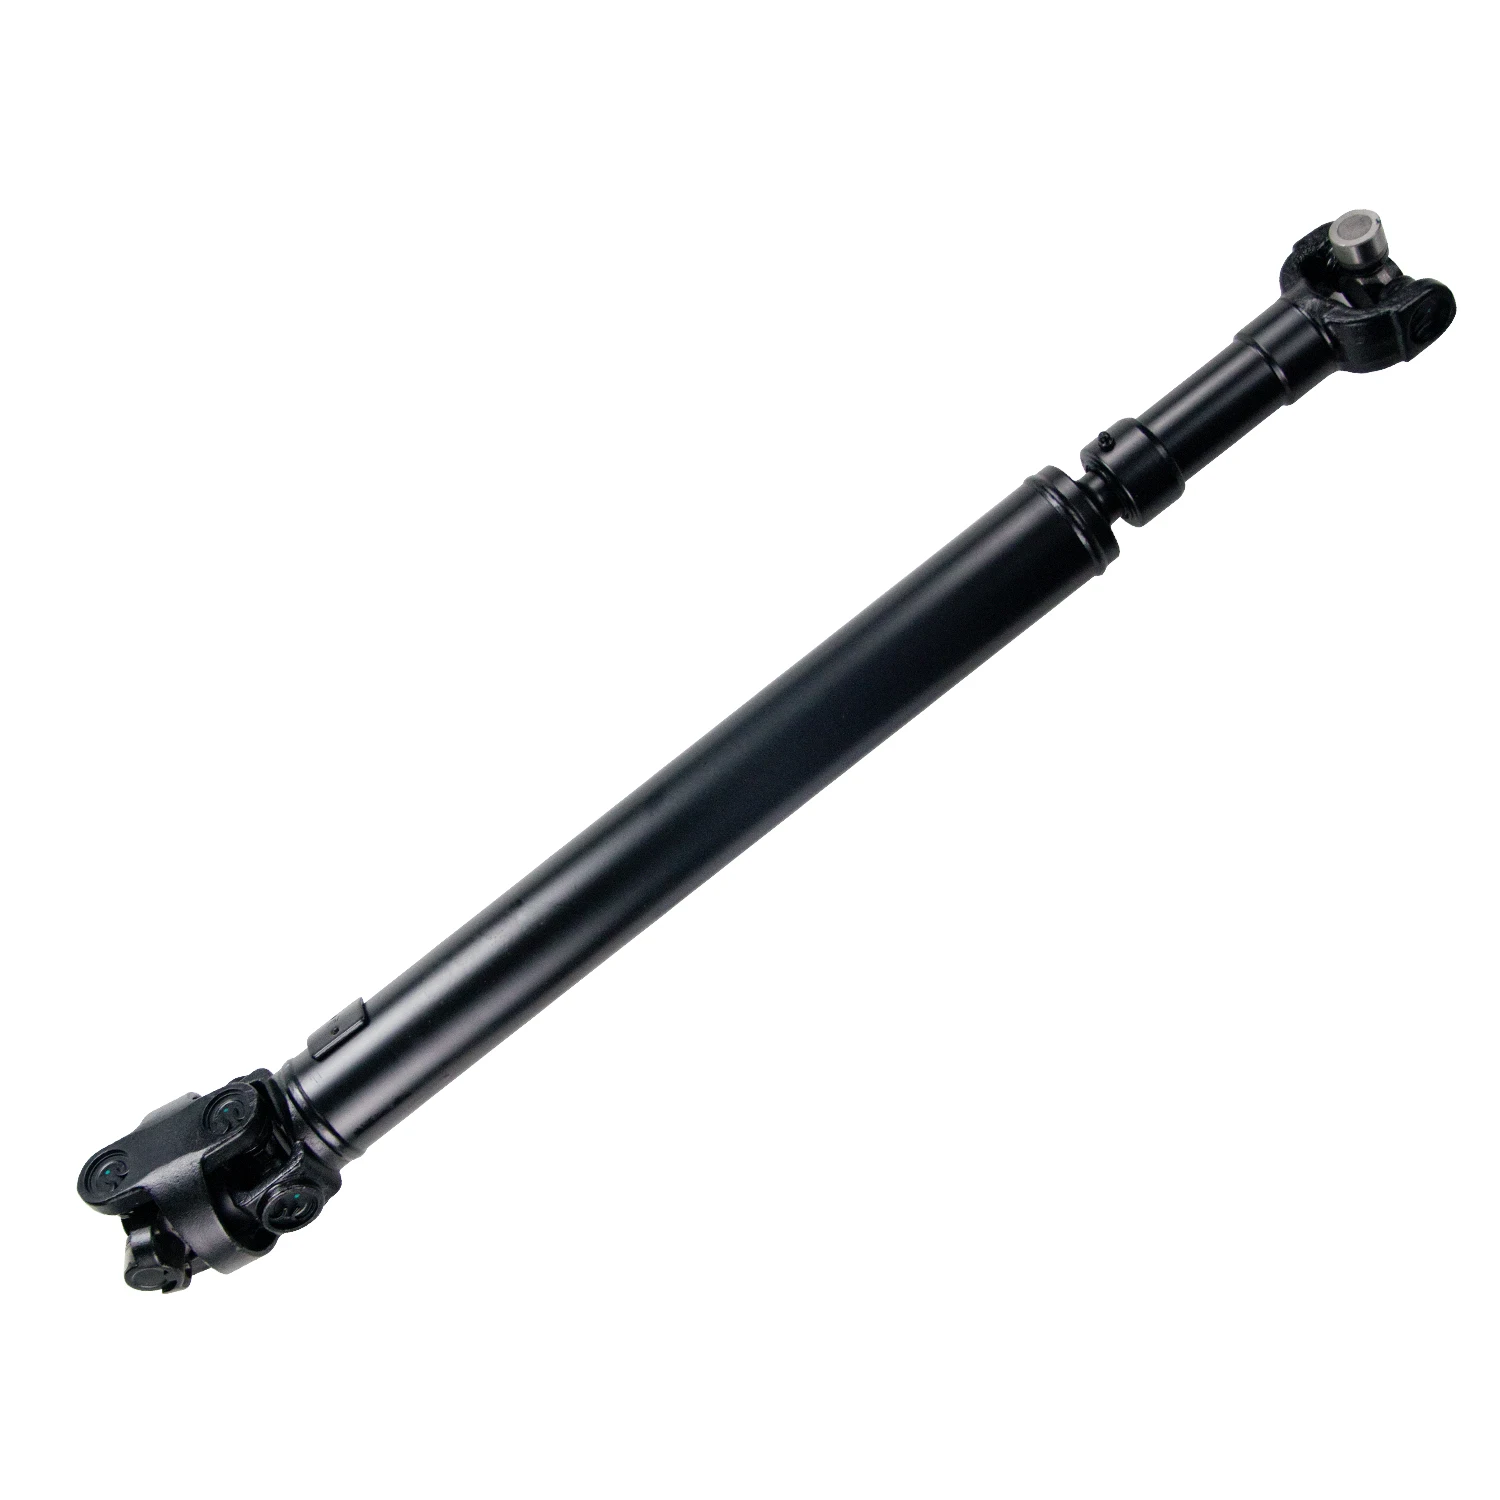 For Jeep Wrangler Tj Parts New Front Propeller Shaft Drive Shaft 65-9316  Driveshaft With High Quality Kowa Brand - Buy For Jeep Wrangler Tj Parts,65-9316,Propeller  Shaft For Jeep Wrangler Tj Product on